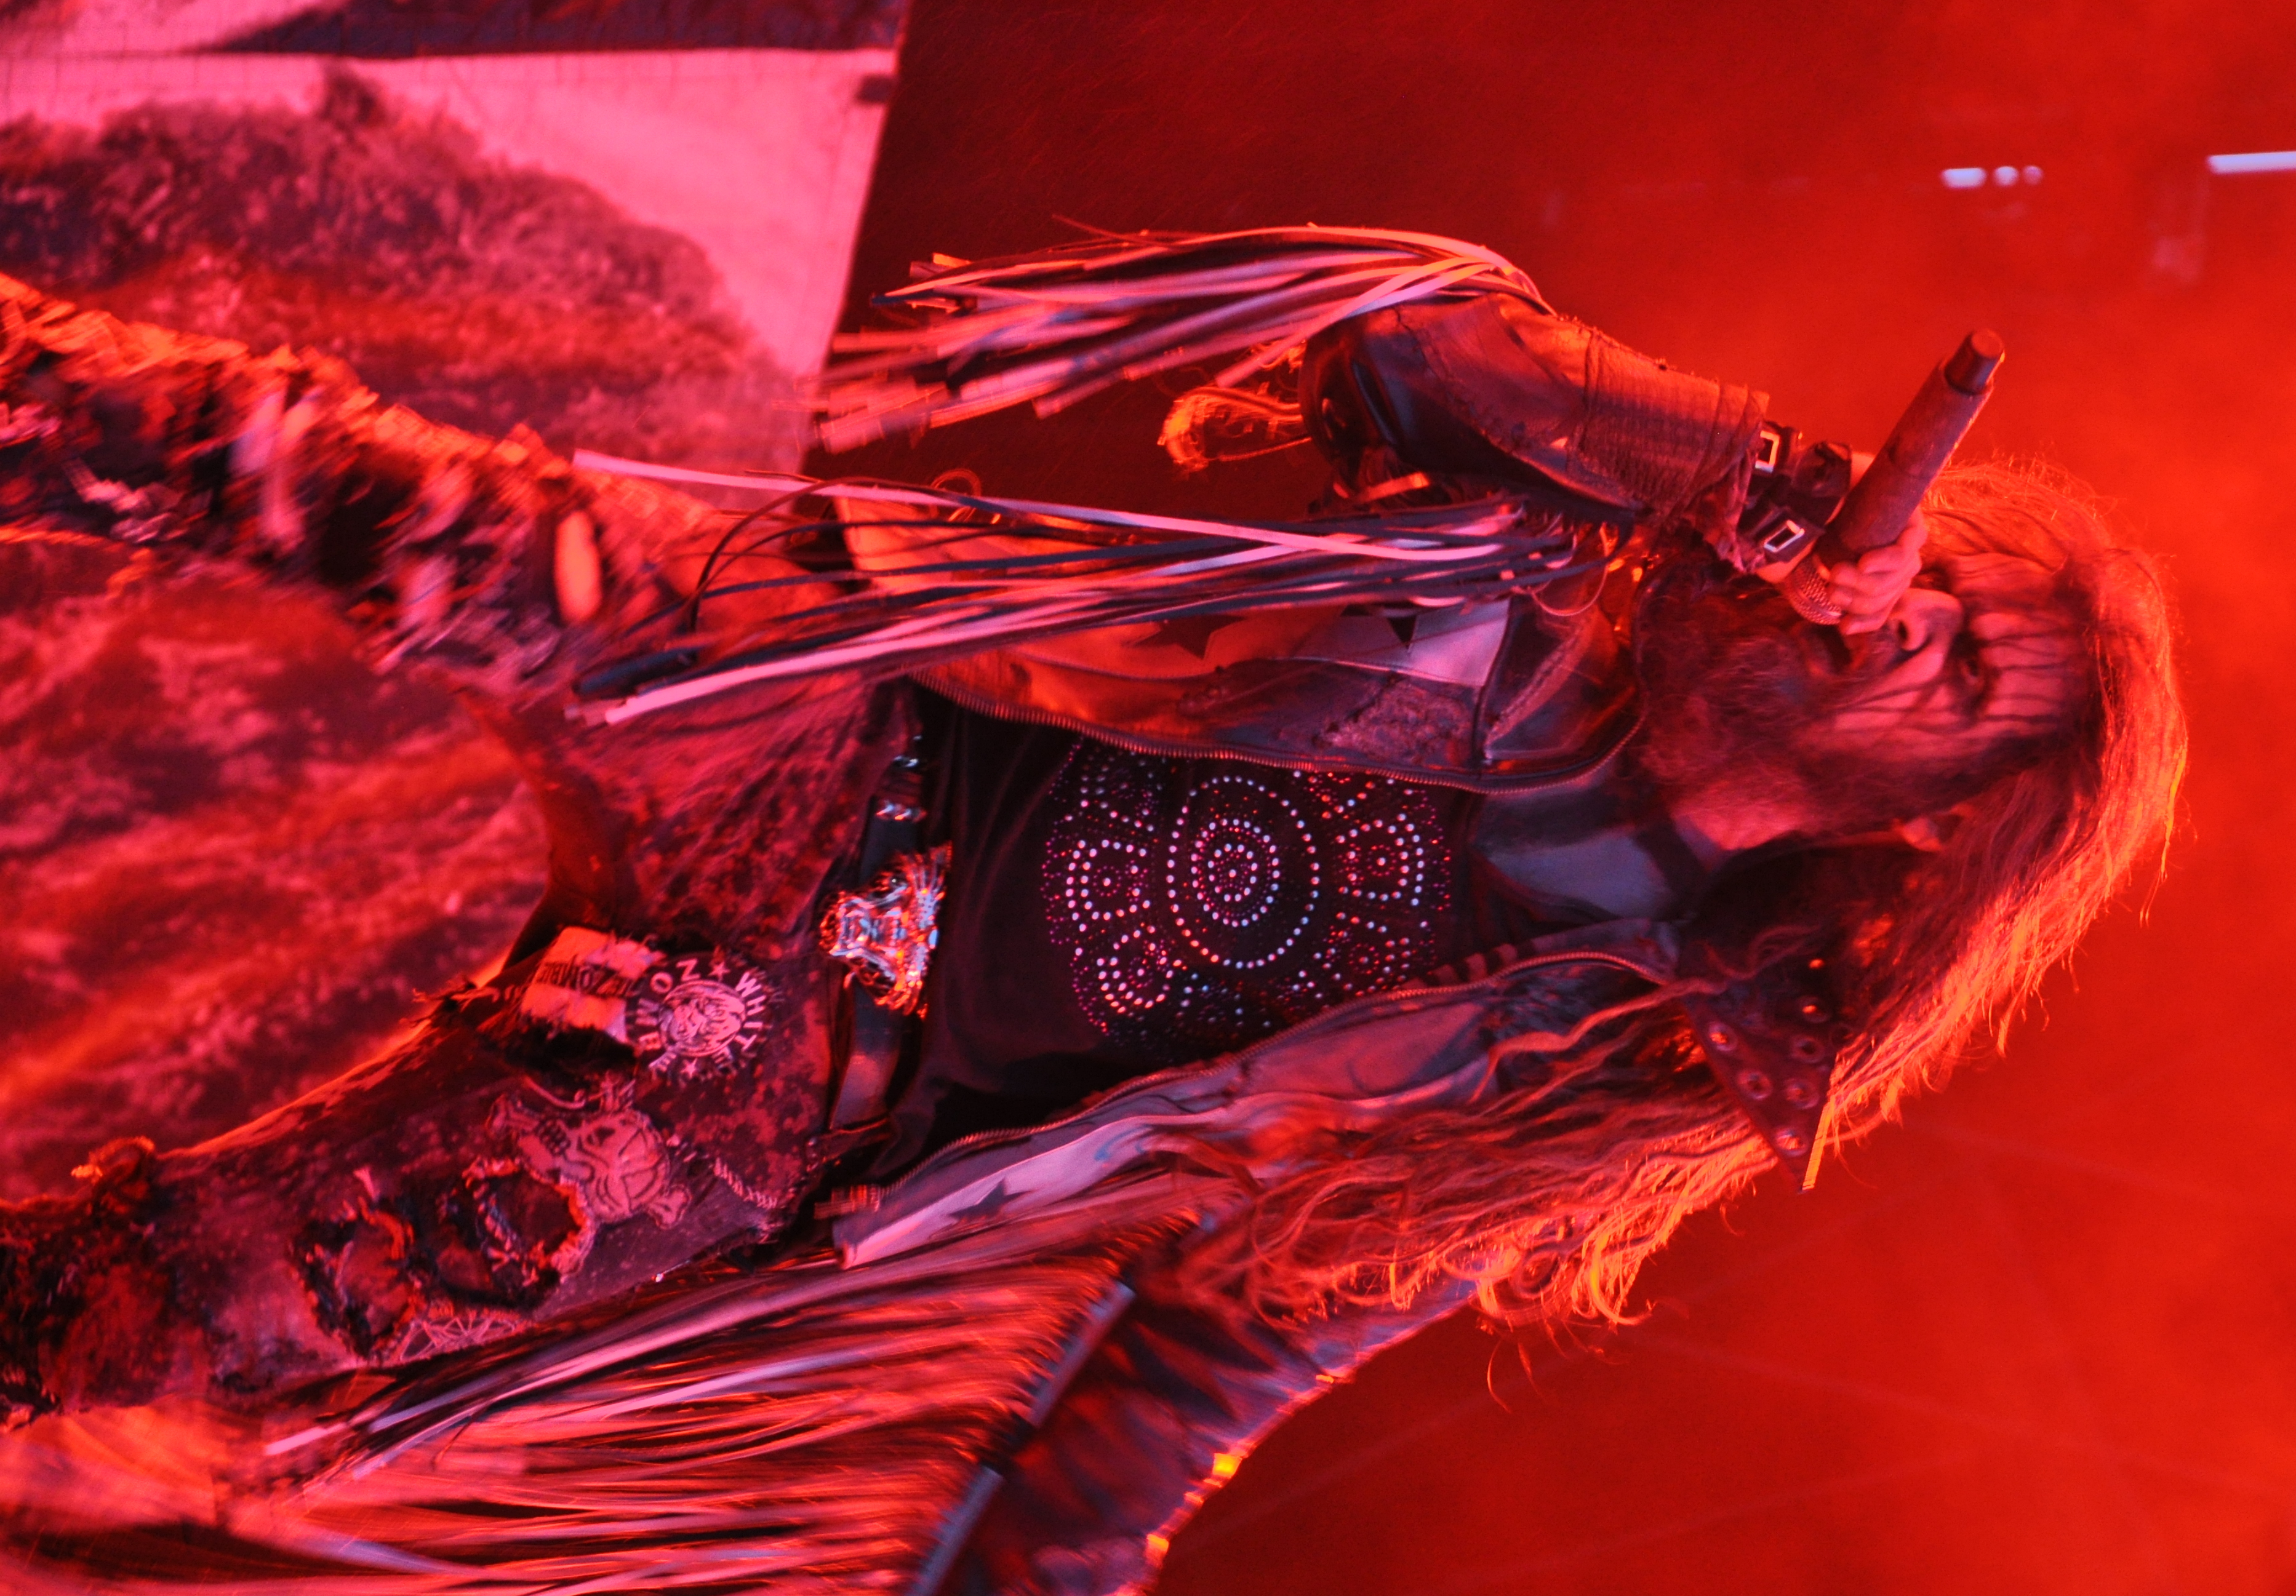 File:Rob Zombie Rock am Ring 2014 (42).JPG - Wikimedia Commons